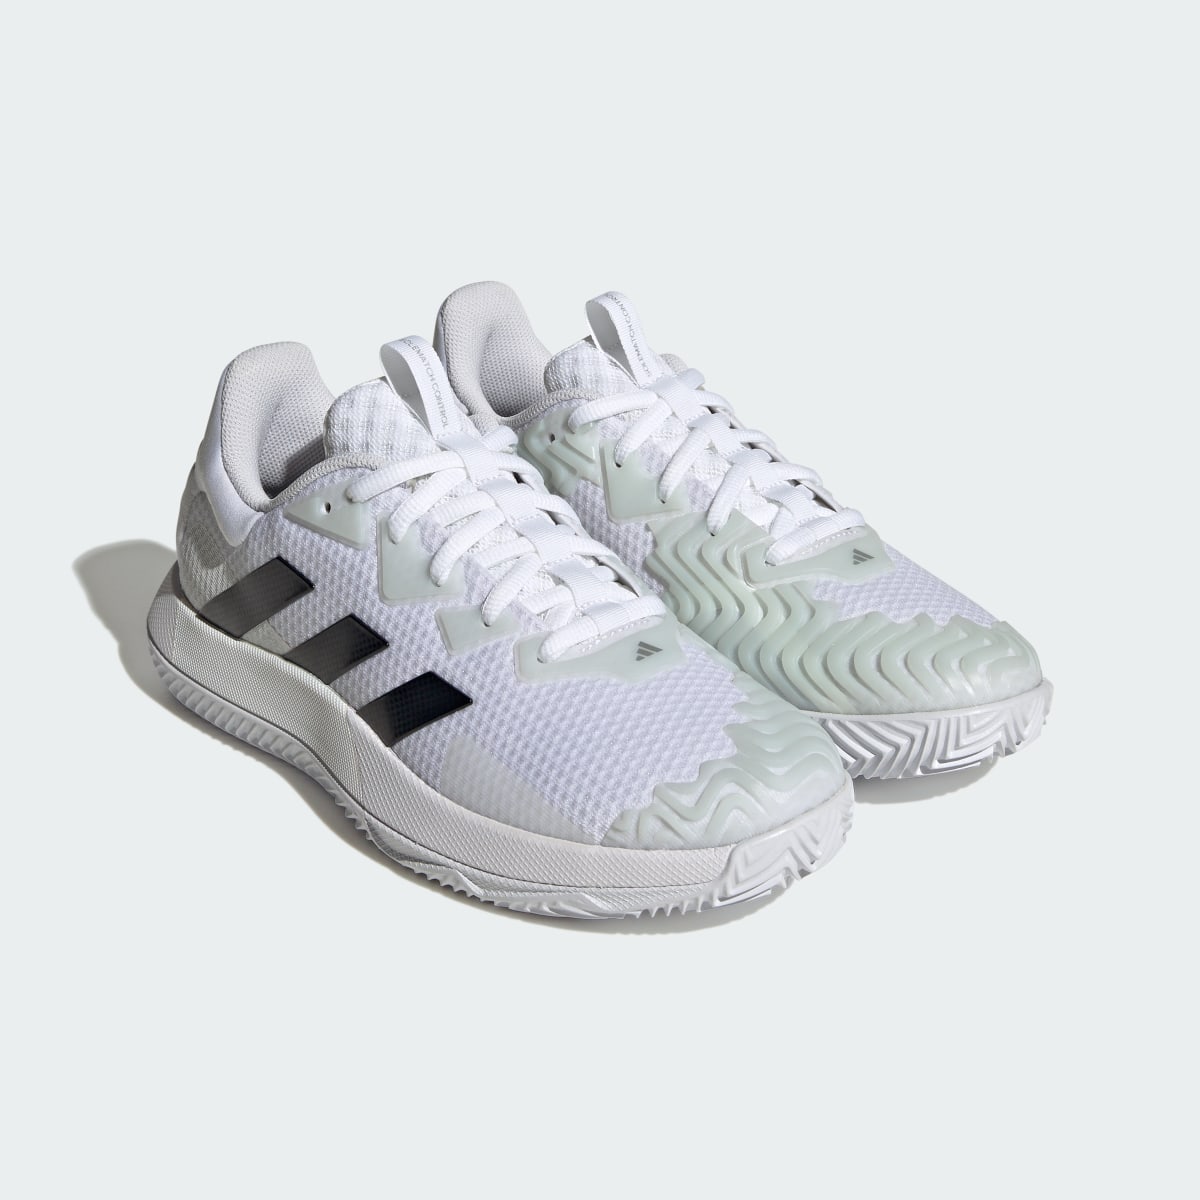 Adidas SoleMatch Control Clay Court Tennis Shoes. 5